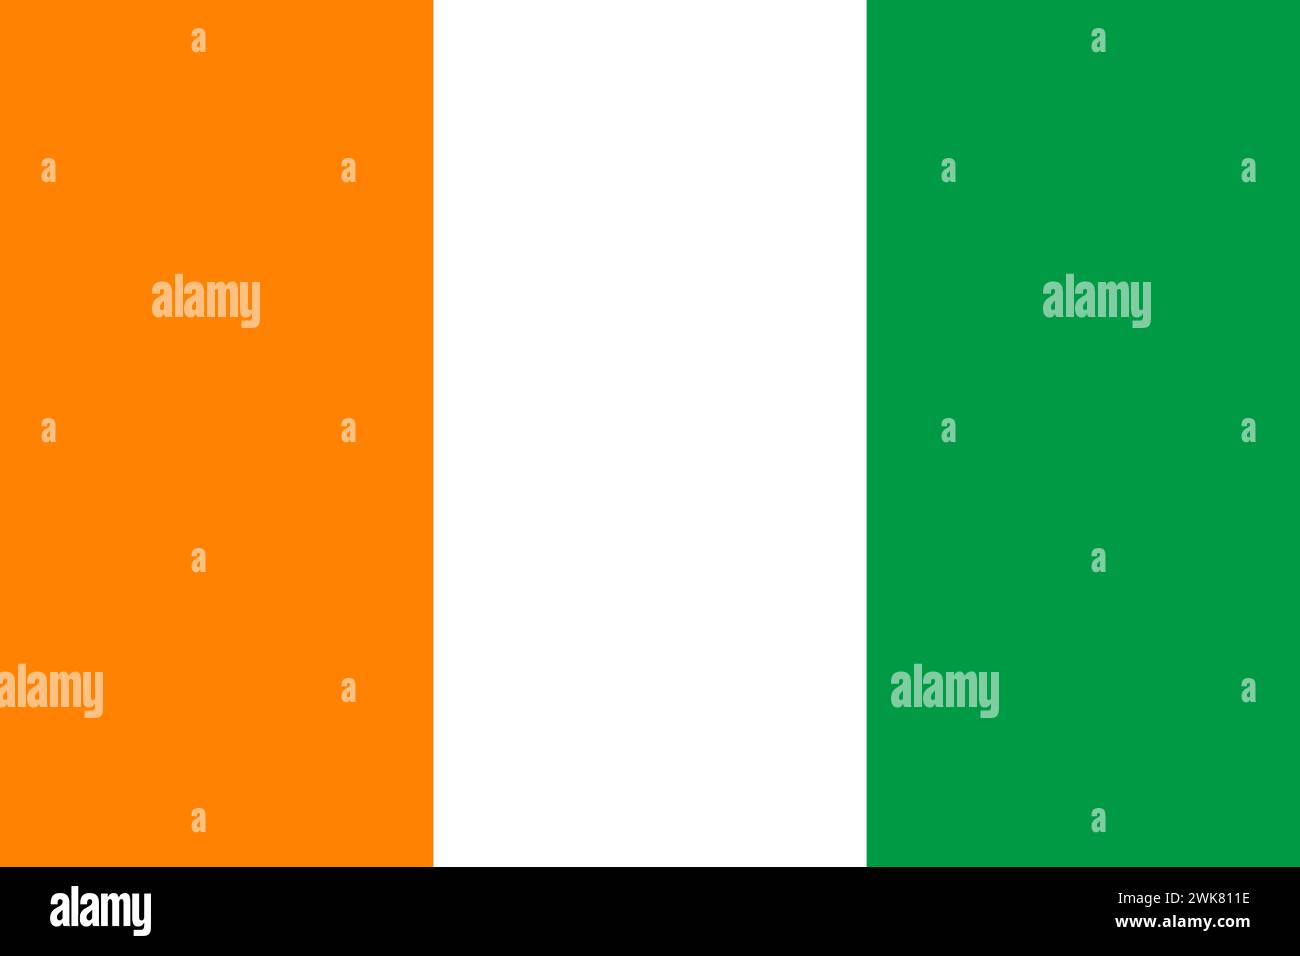 Countries, cultures and travel: the flag of Ivory Coast Stock Vector